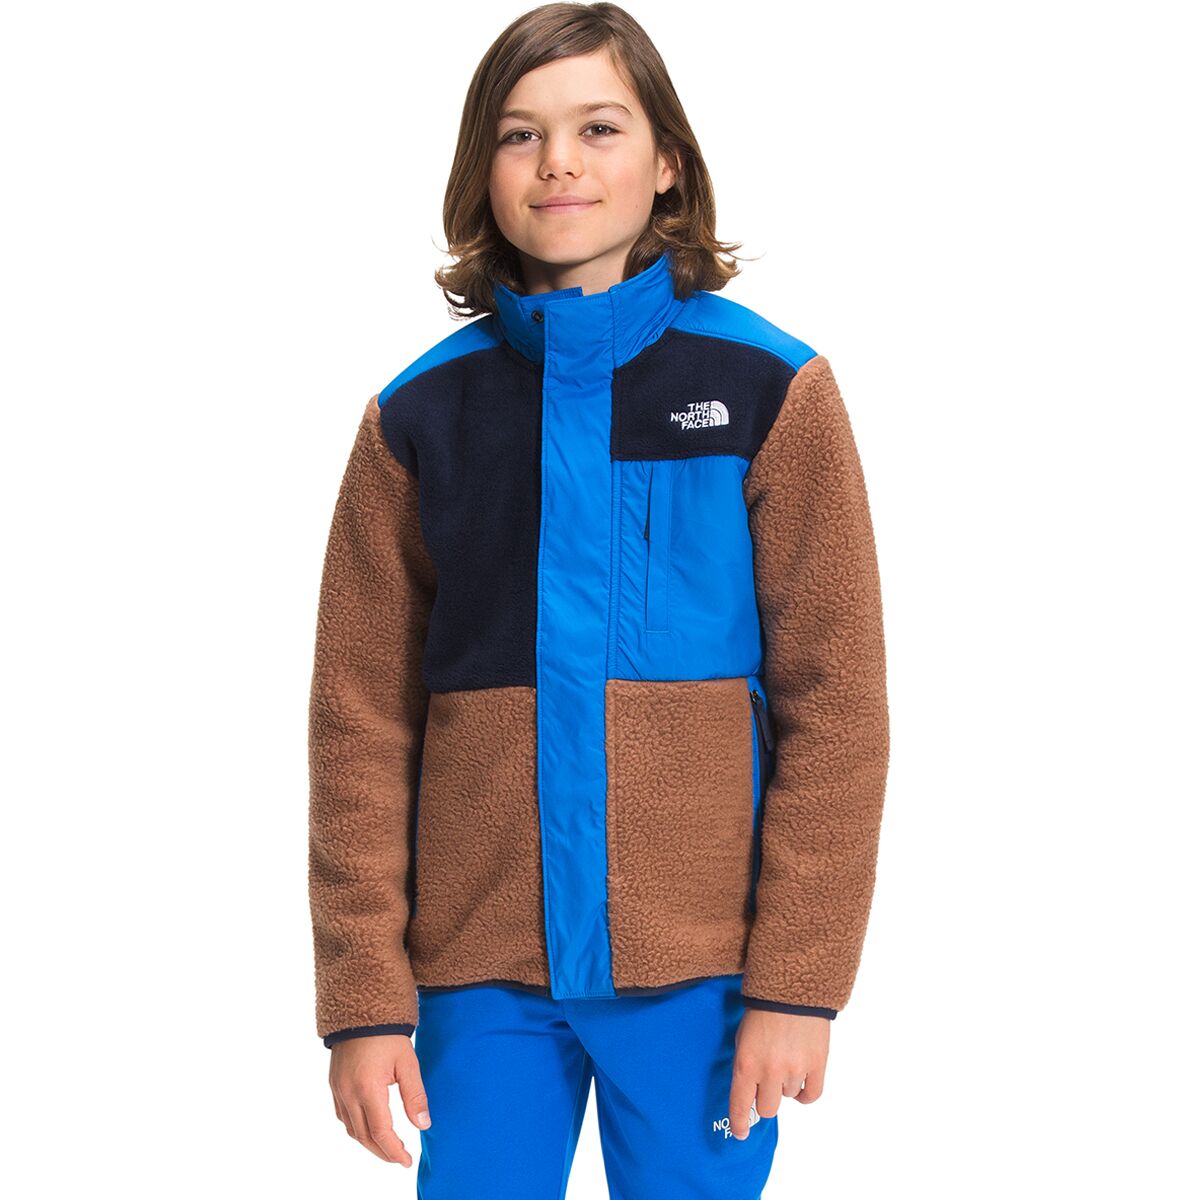 The North Face Forrest Mixed-Media Full-Zip Jacket - Boys'